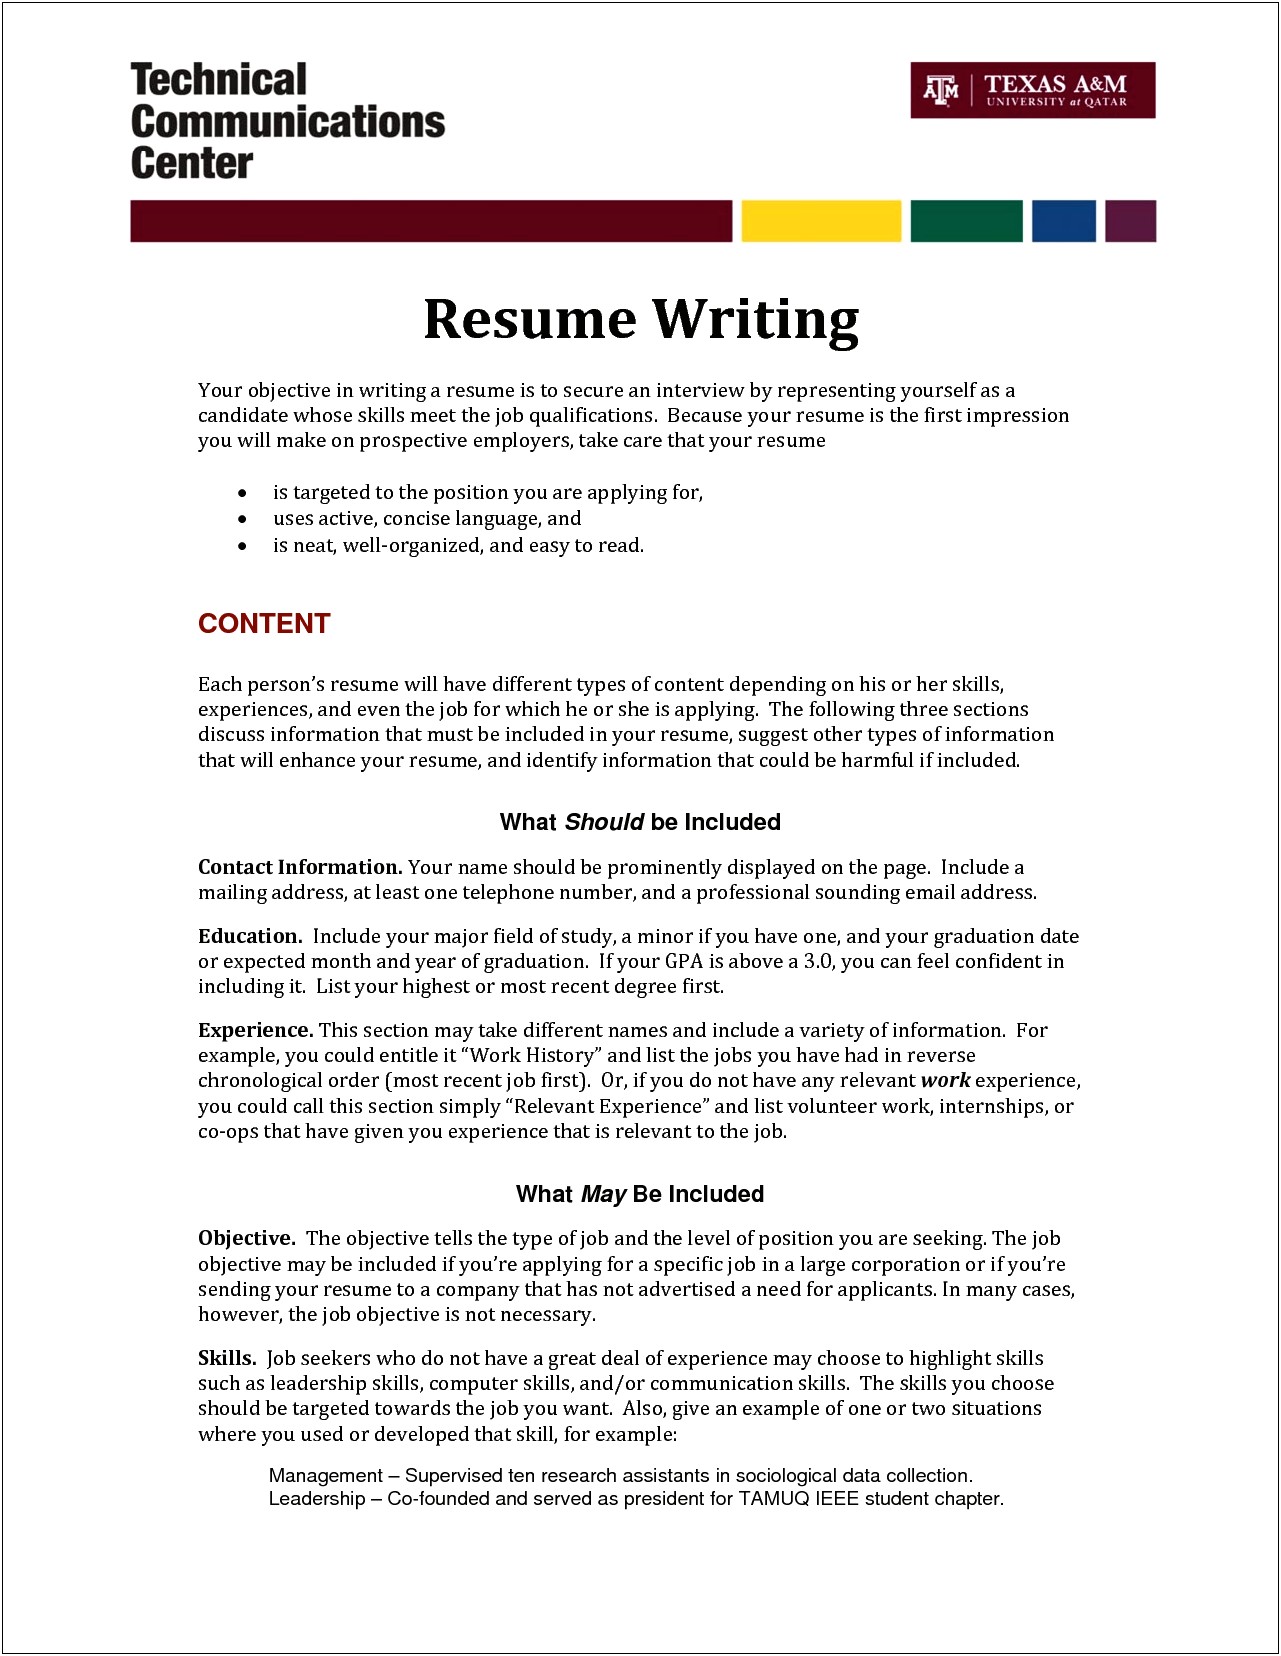 Objective And Skills For Resume For Communications Intern